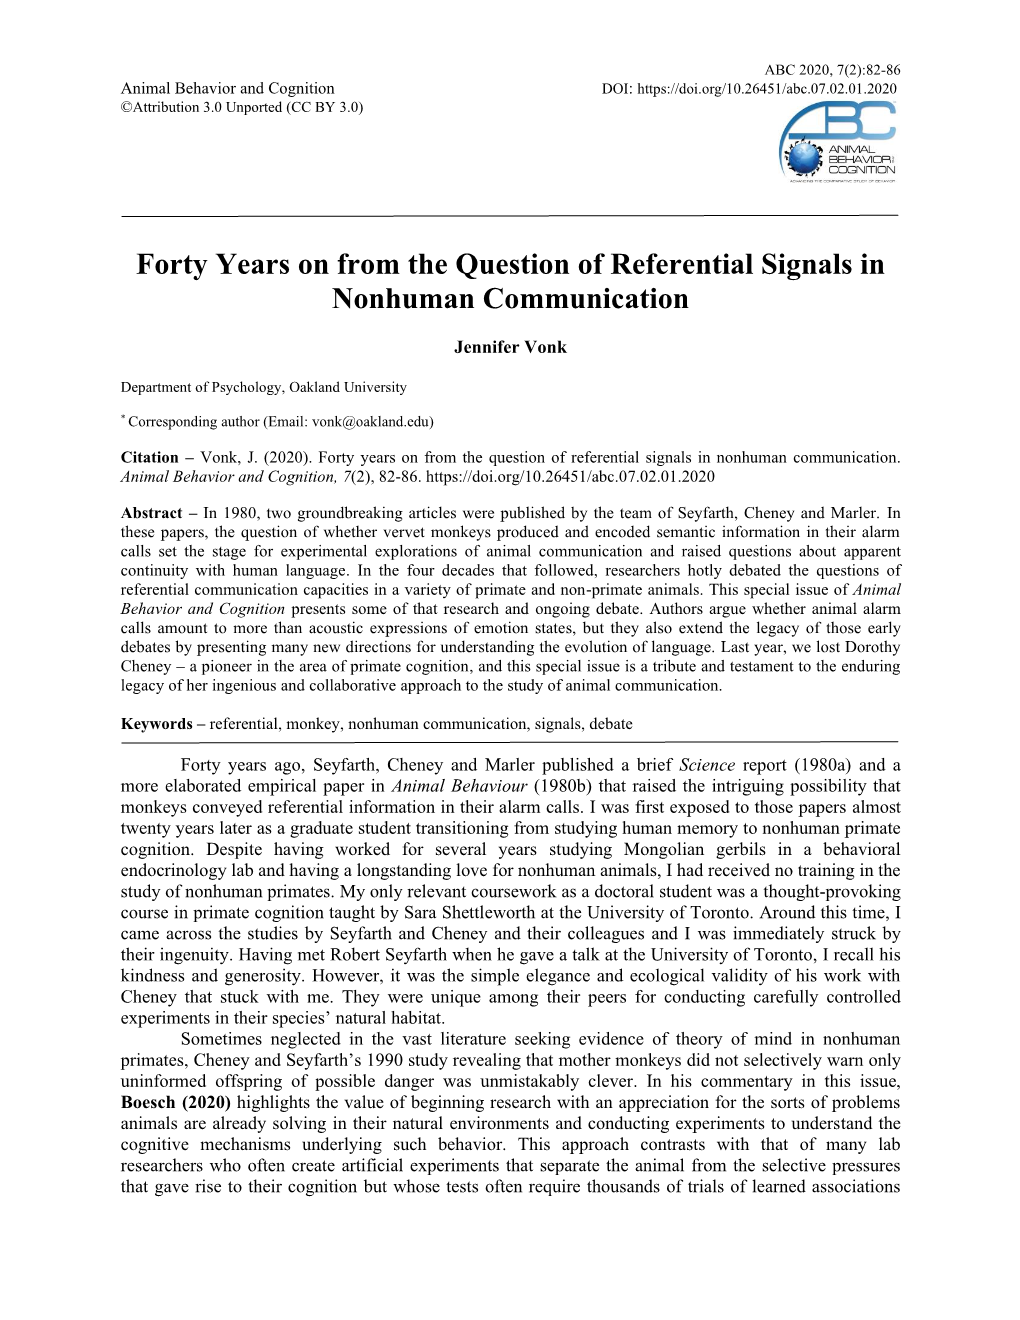 Forty Years on from the Question of Referential Signals in Nonhuman Communication